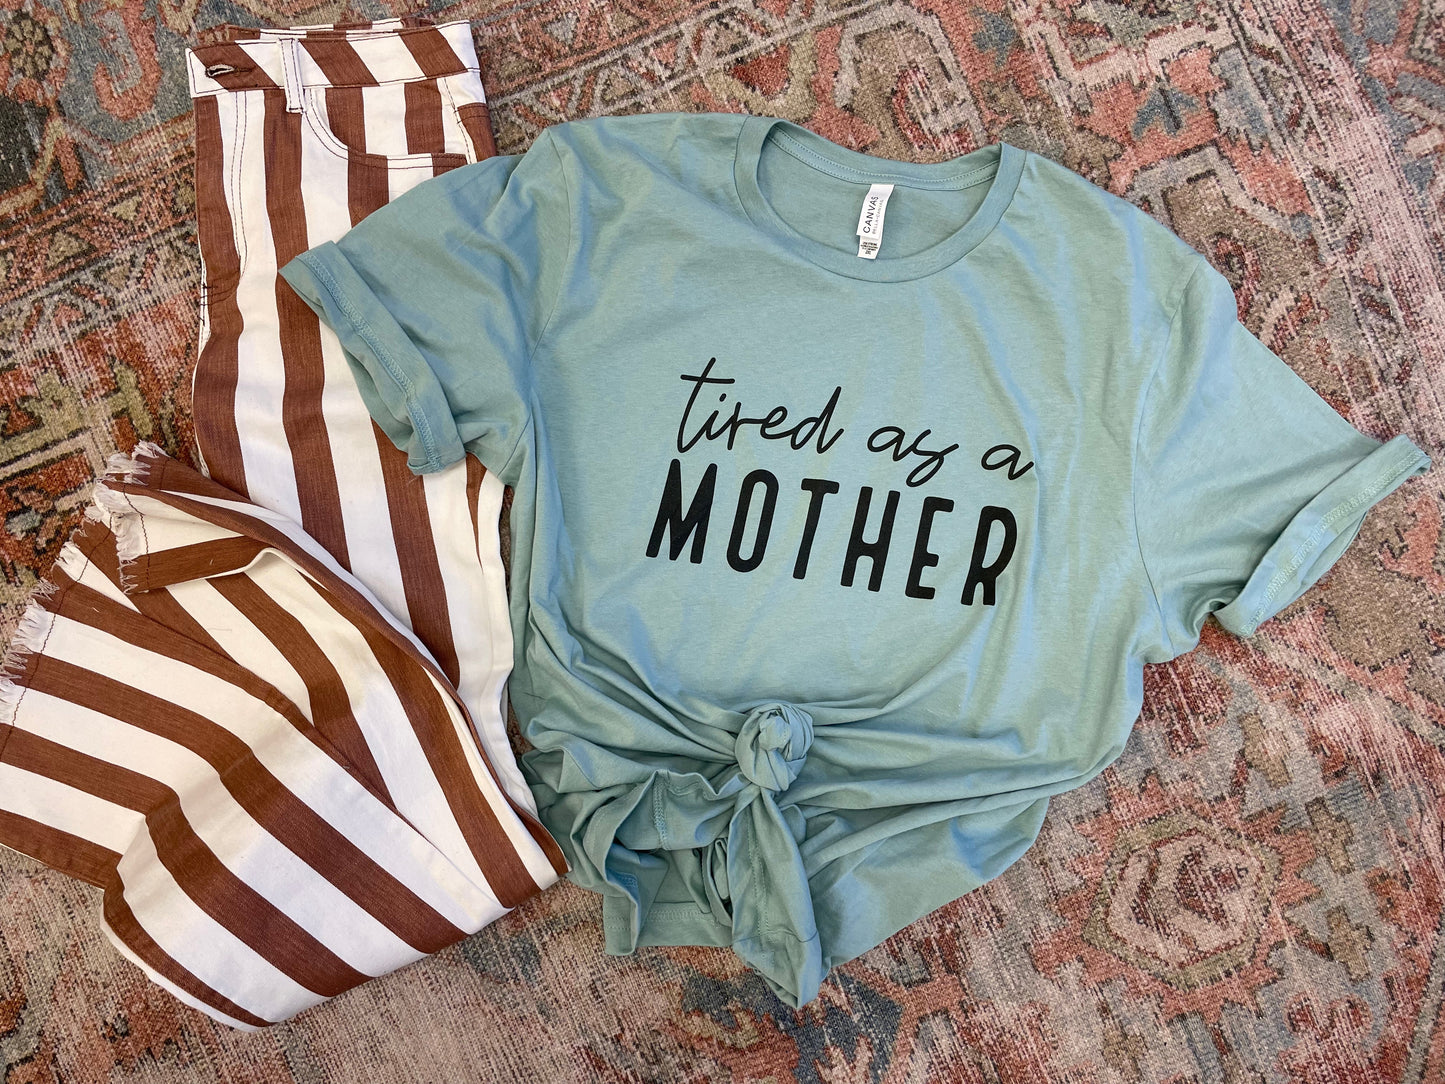 Tired as a mother Tee